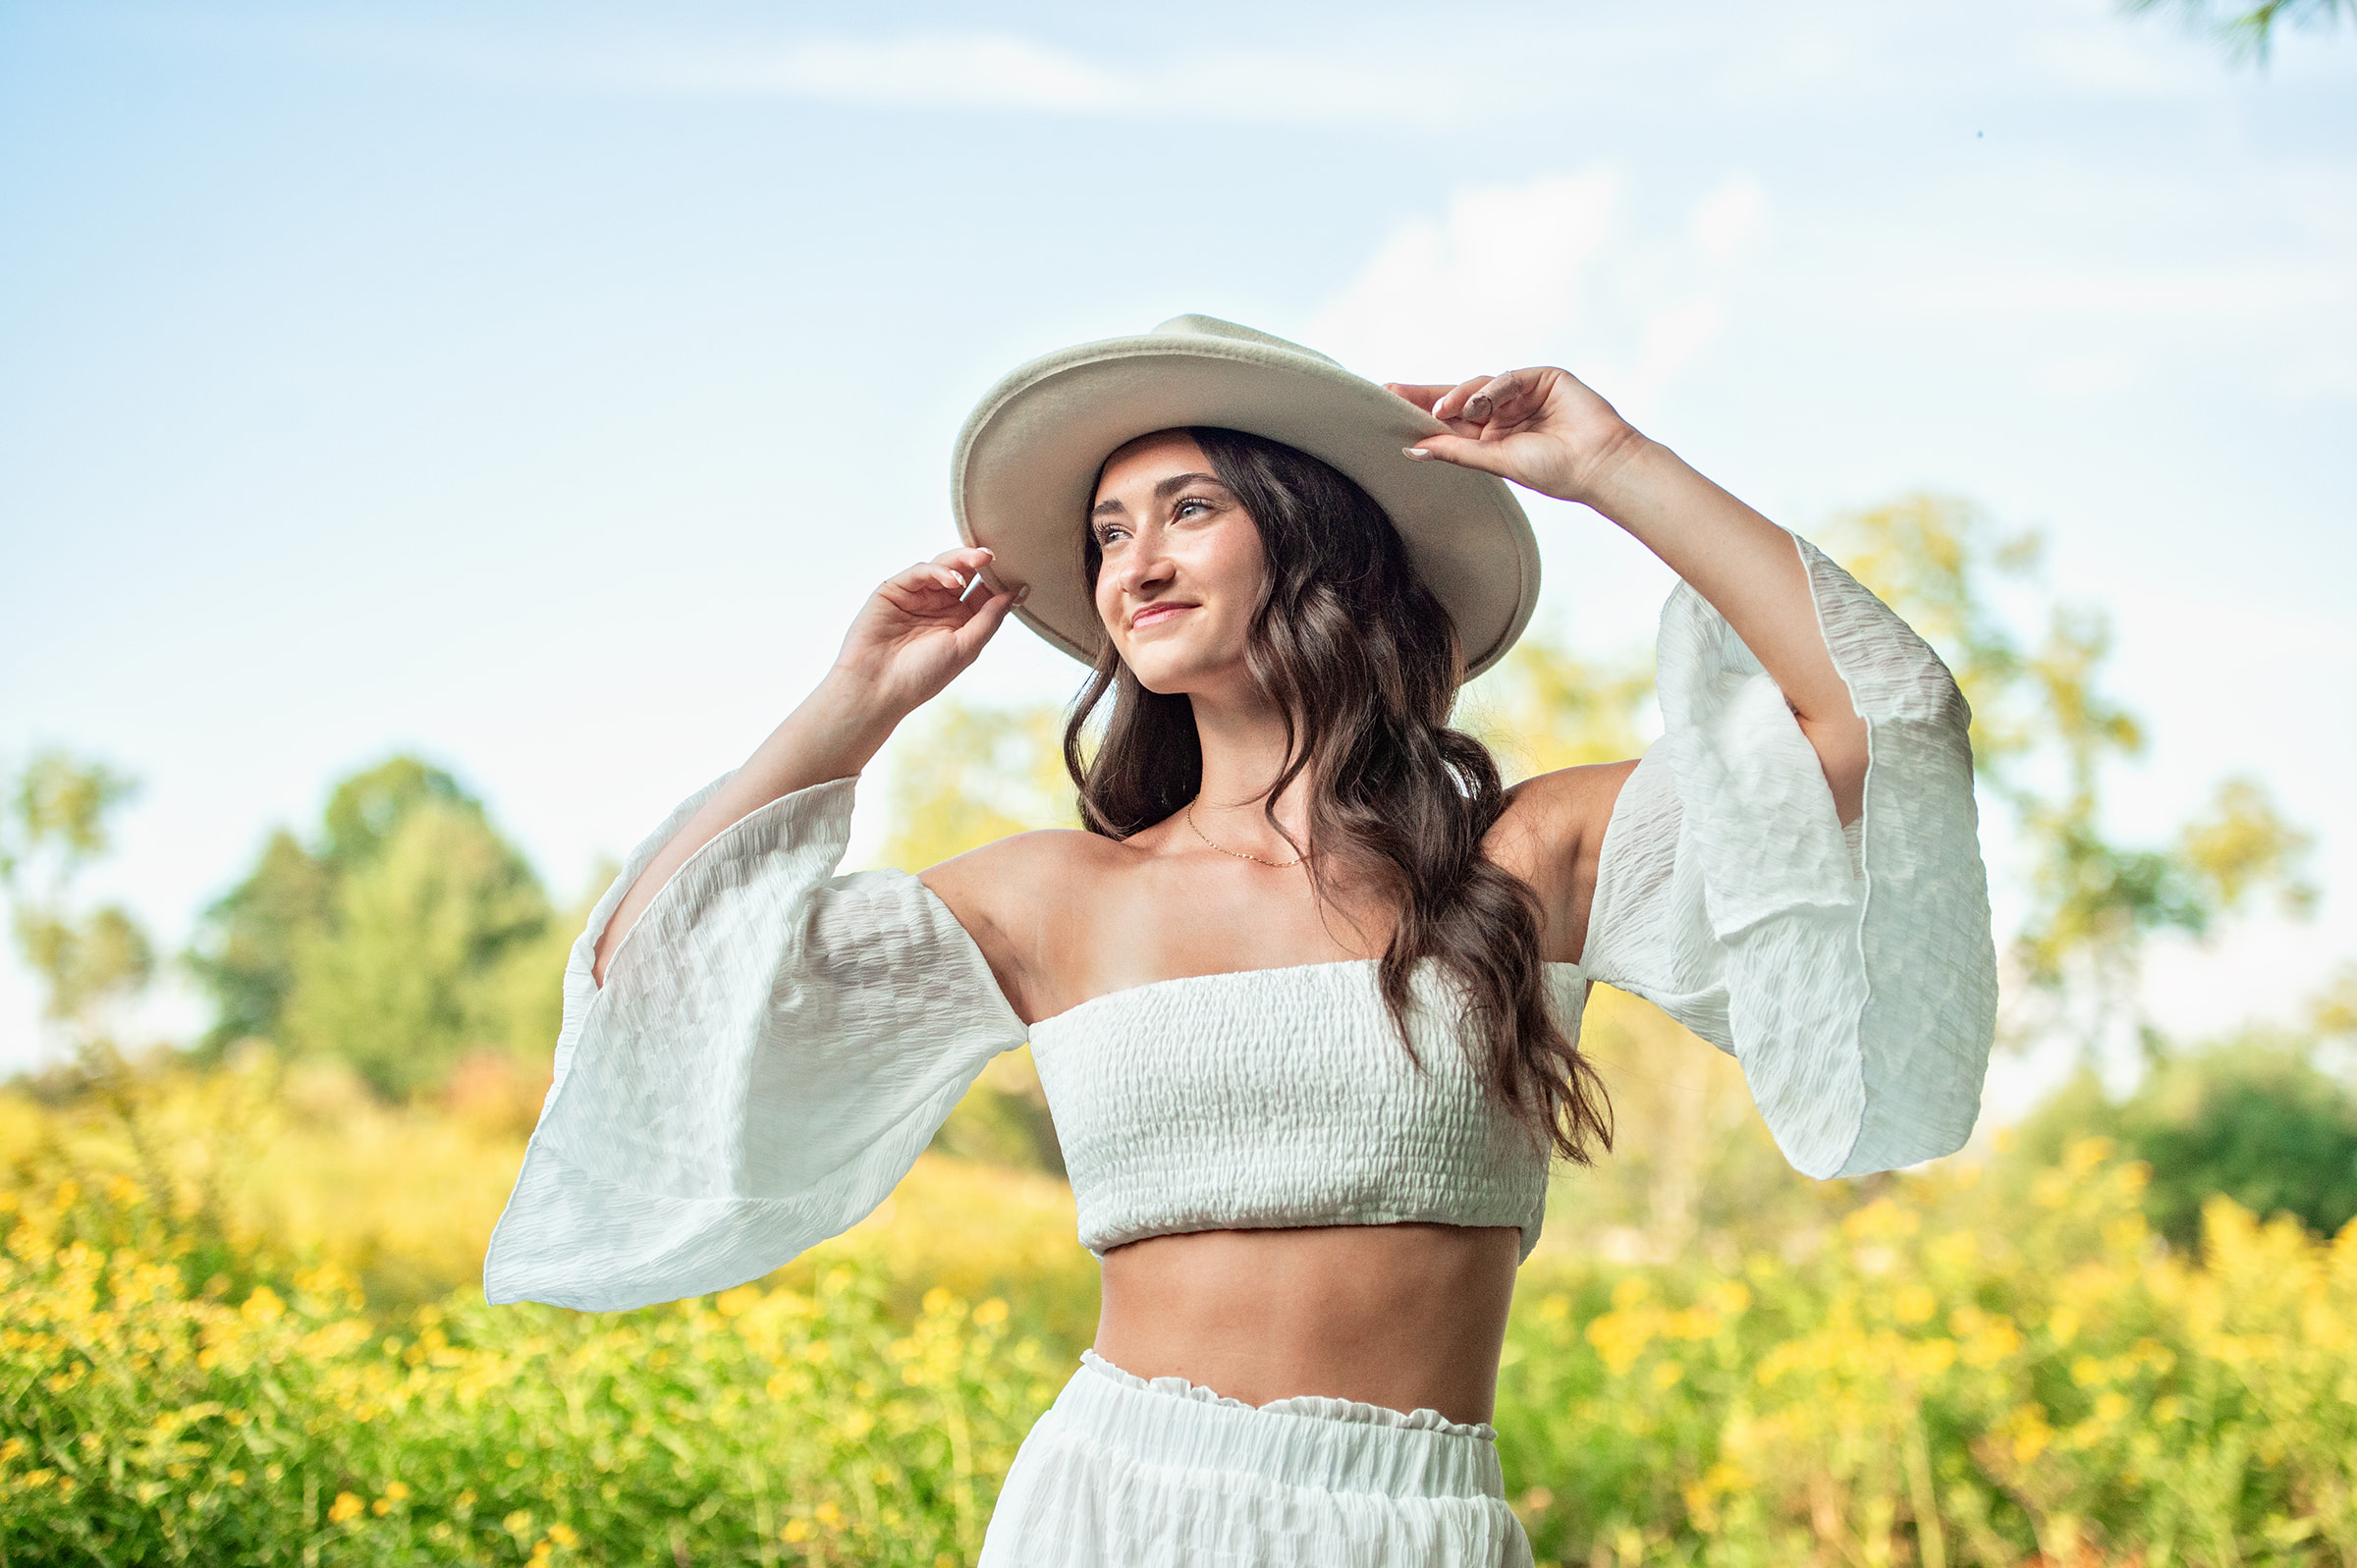 Beautiful high school senior girl in a white flowy dress, holding her hat and looking into the distance.